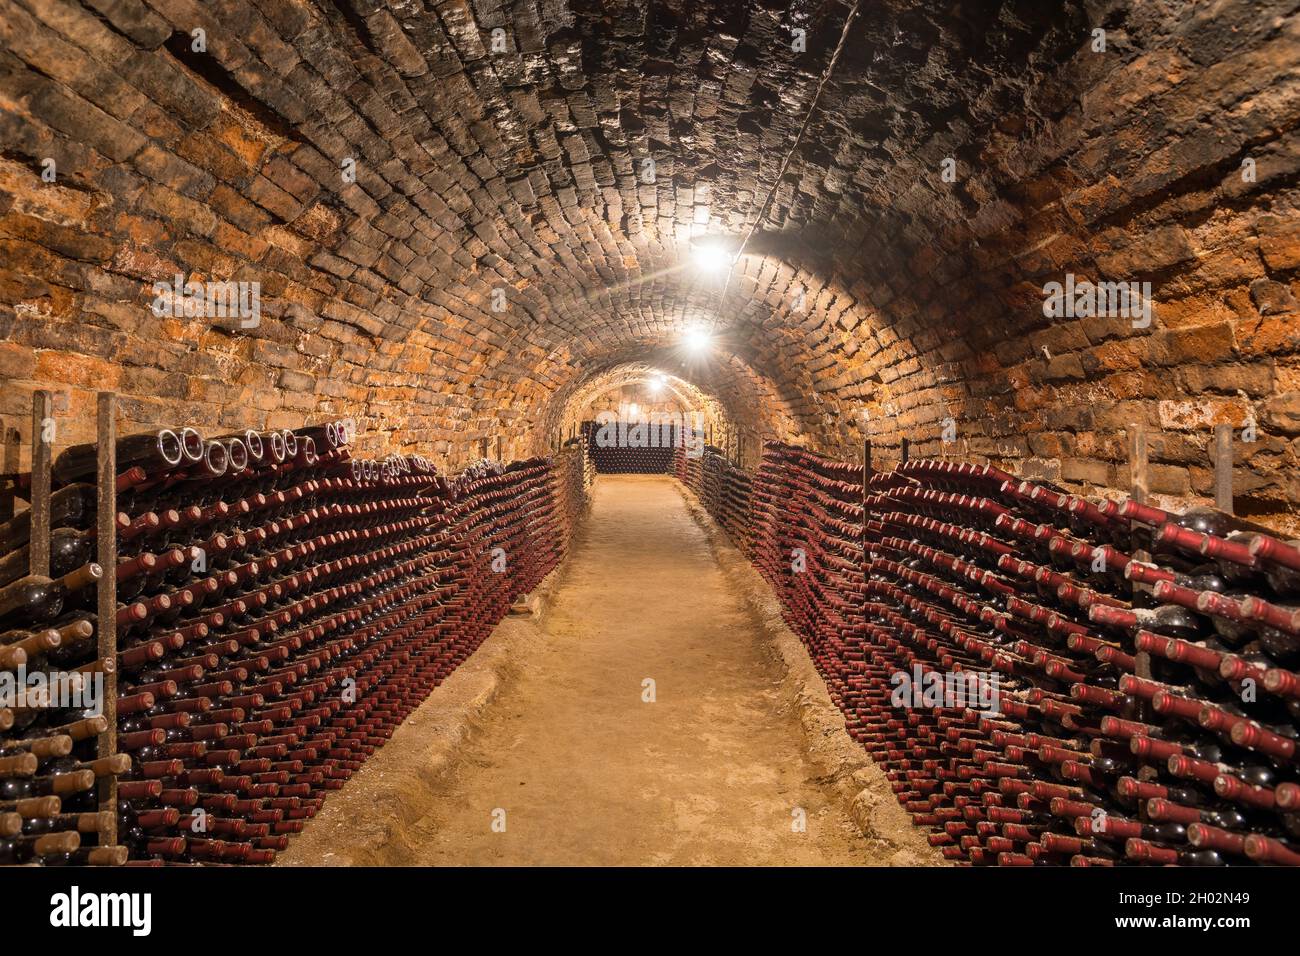 Old wine bottles in rows in the wine cellar Stock Photo